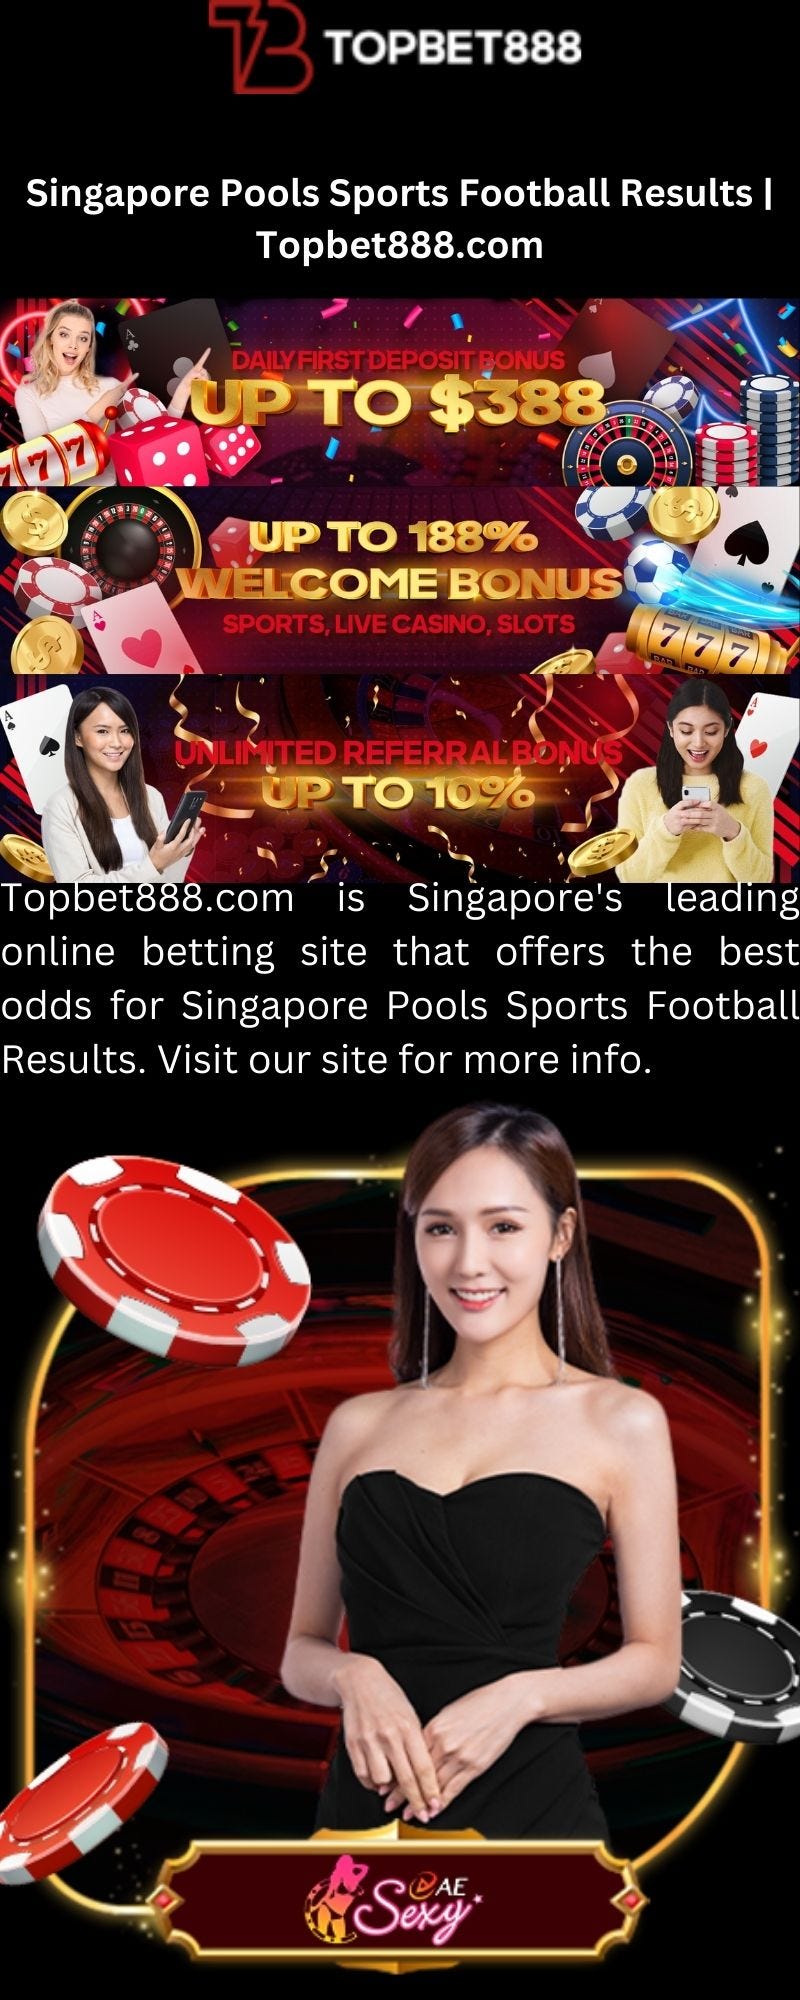 Singapore Pools Sports Football Results Topbet888 - Topbet888